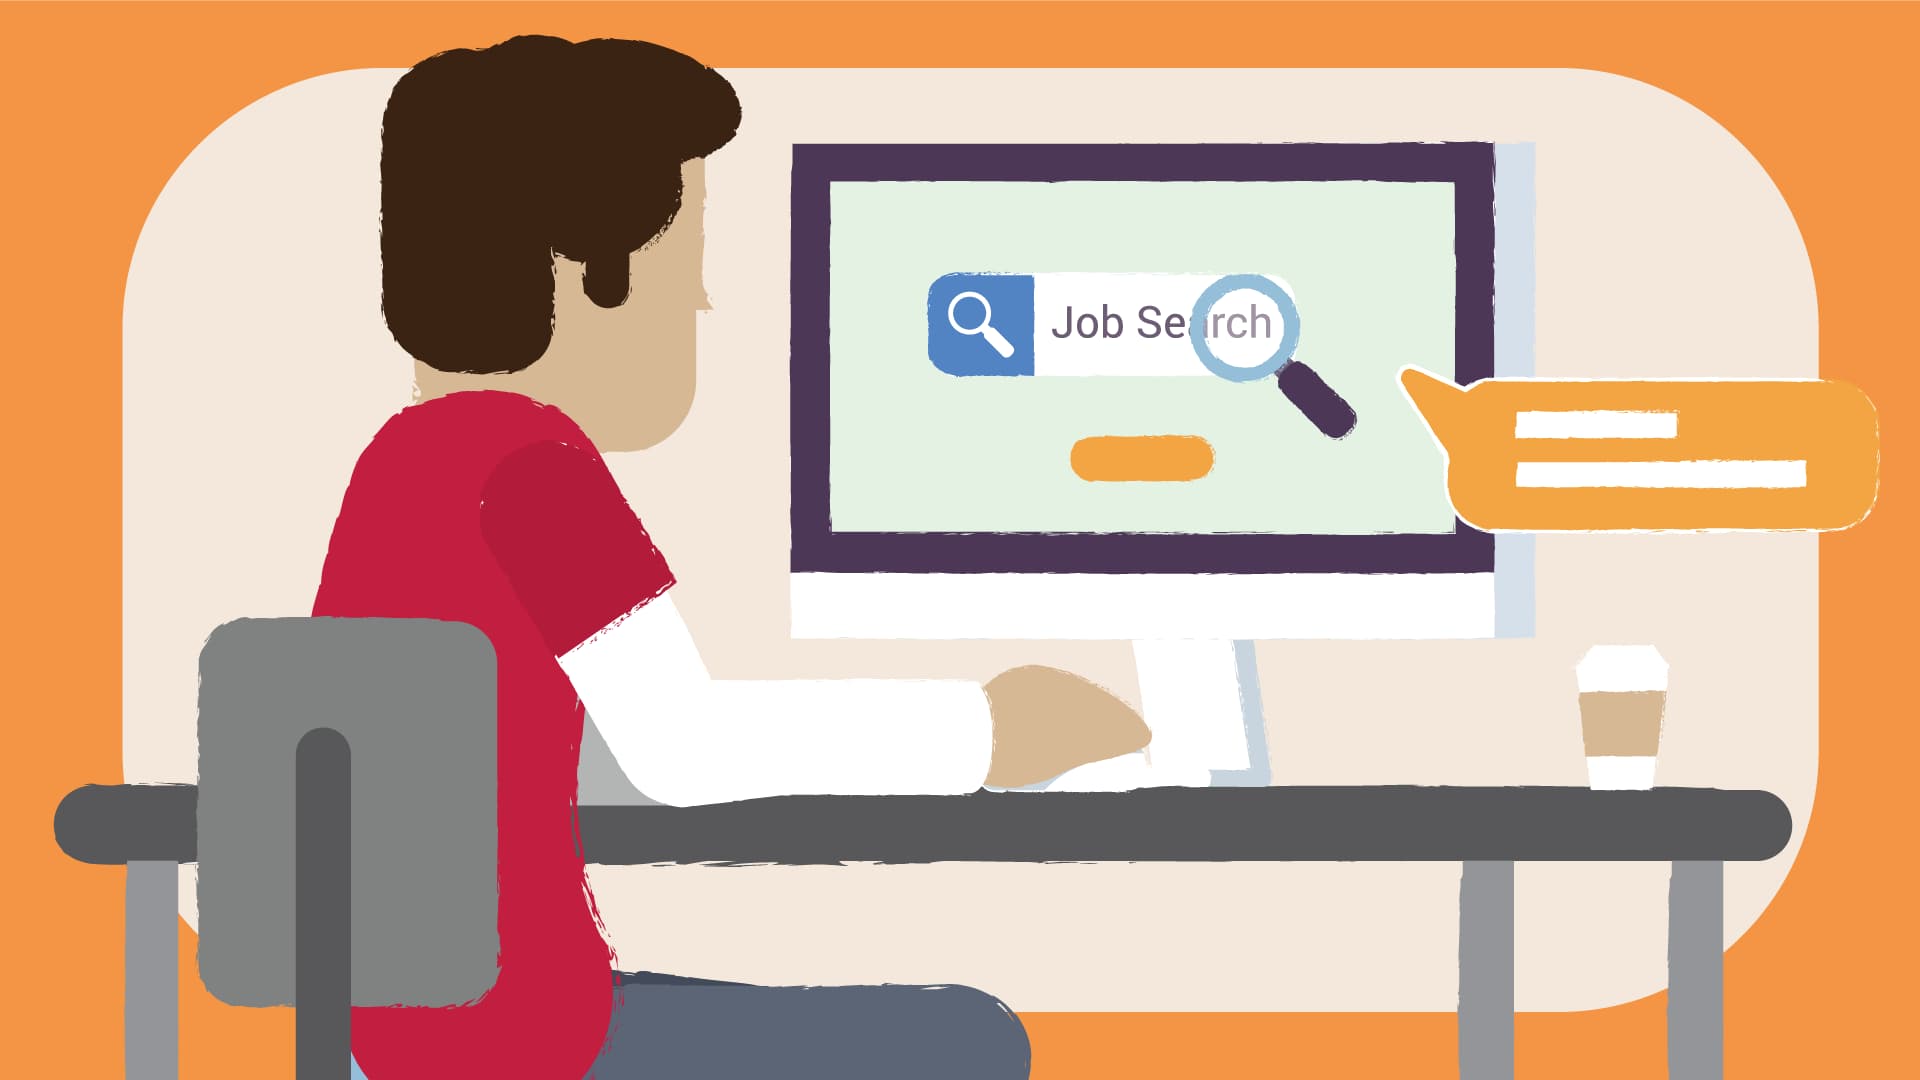 Illustration of person conducting a job search on a computer